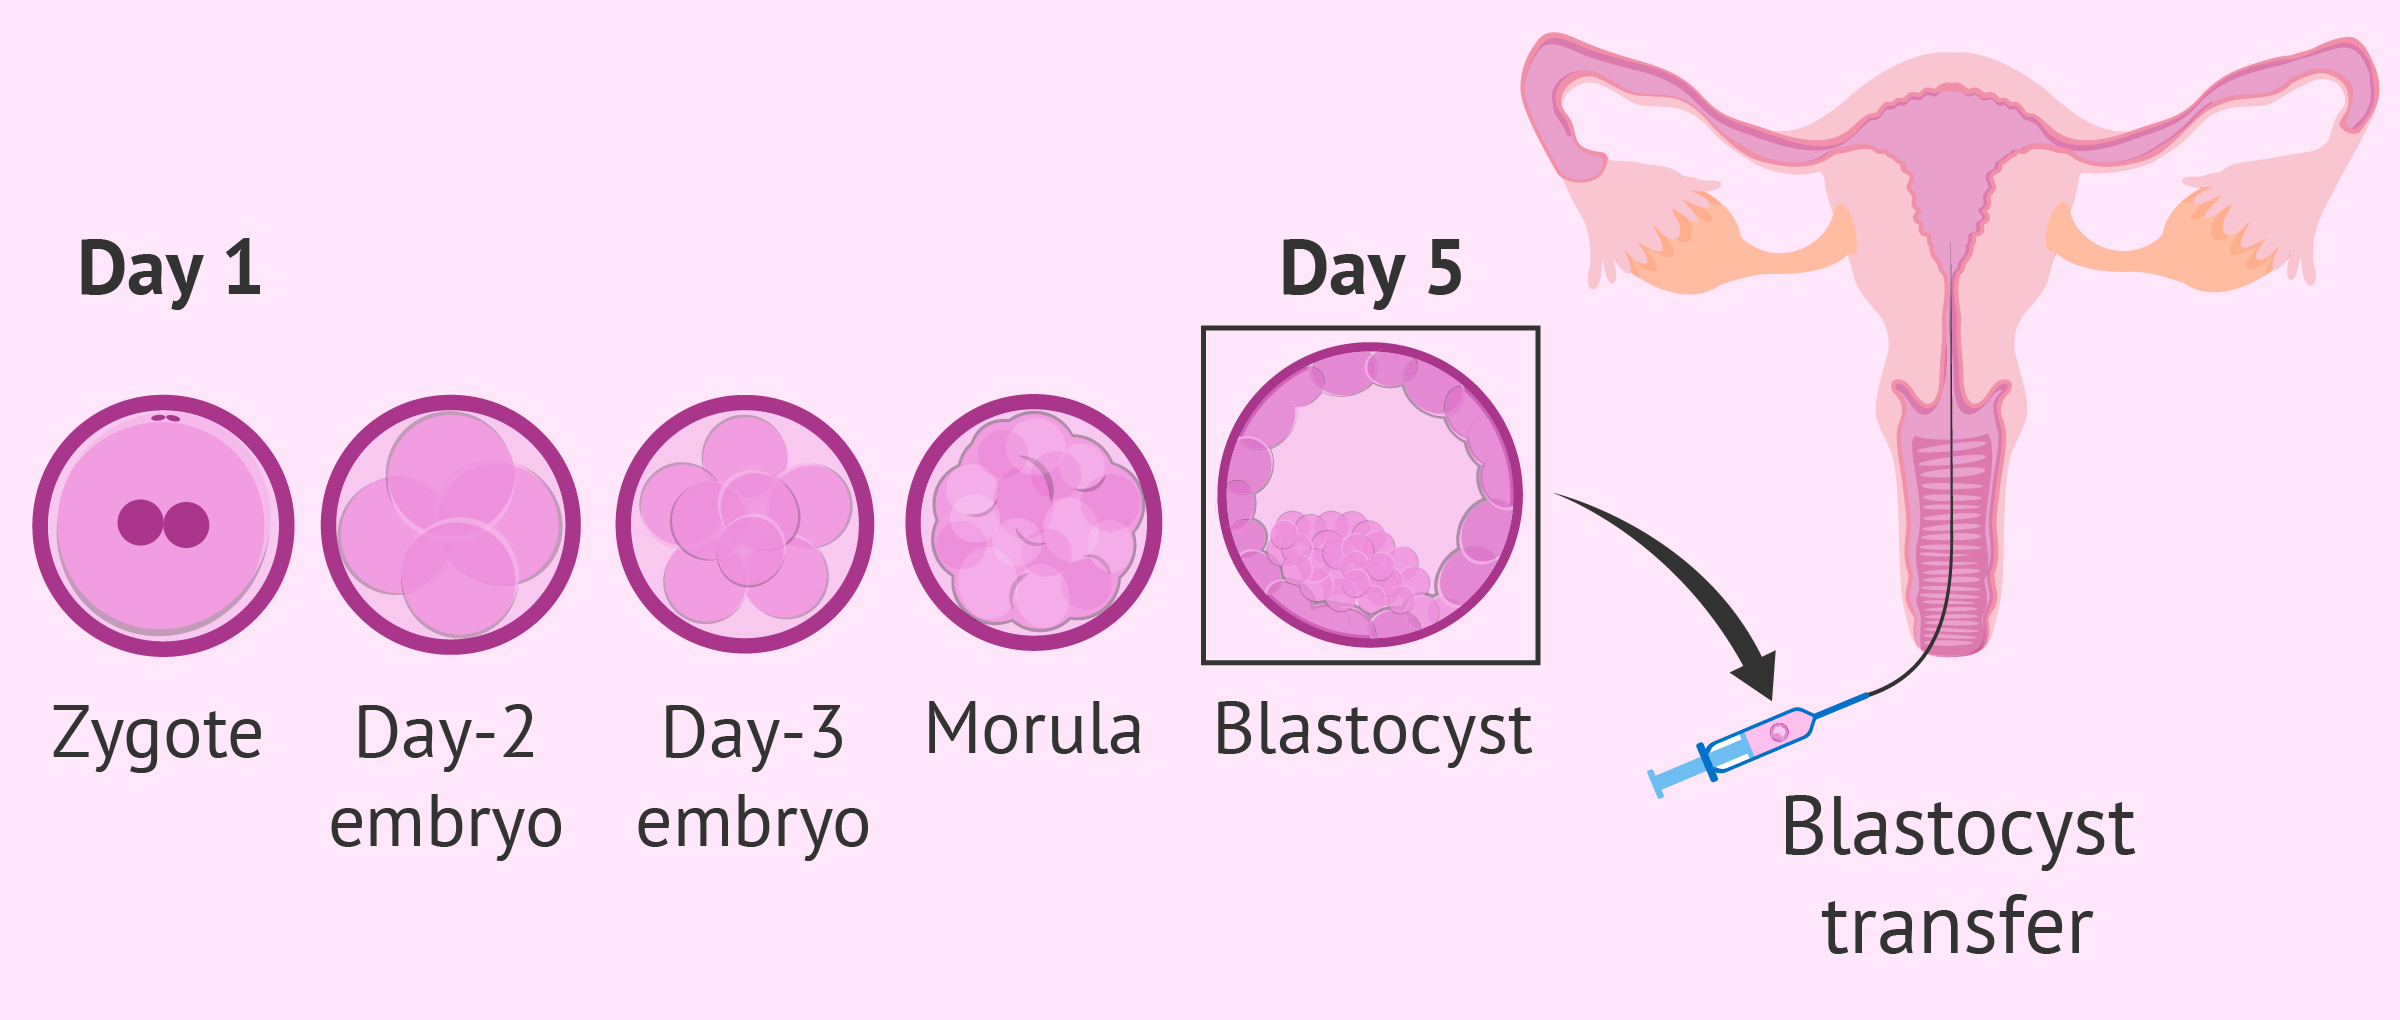 Culture to blastocyst: process day by day